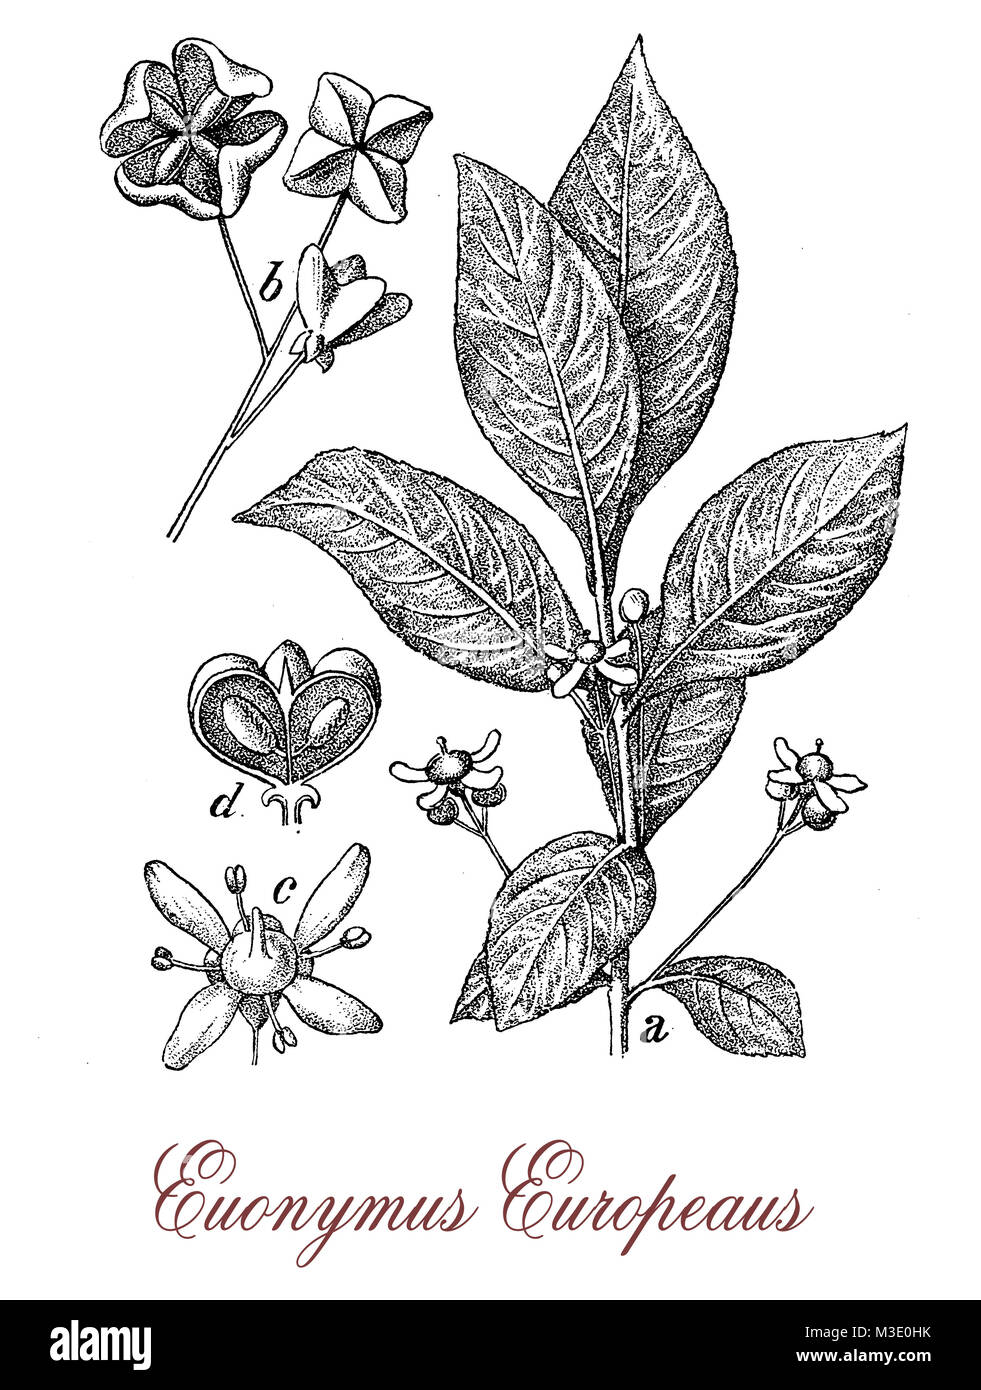 vintage engraving of European spindle or Euonymus Europaeus, ornamental plant with poisonous red-purple fruits Stock Photo